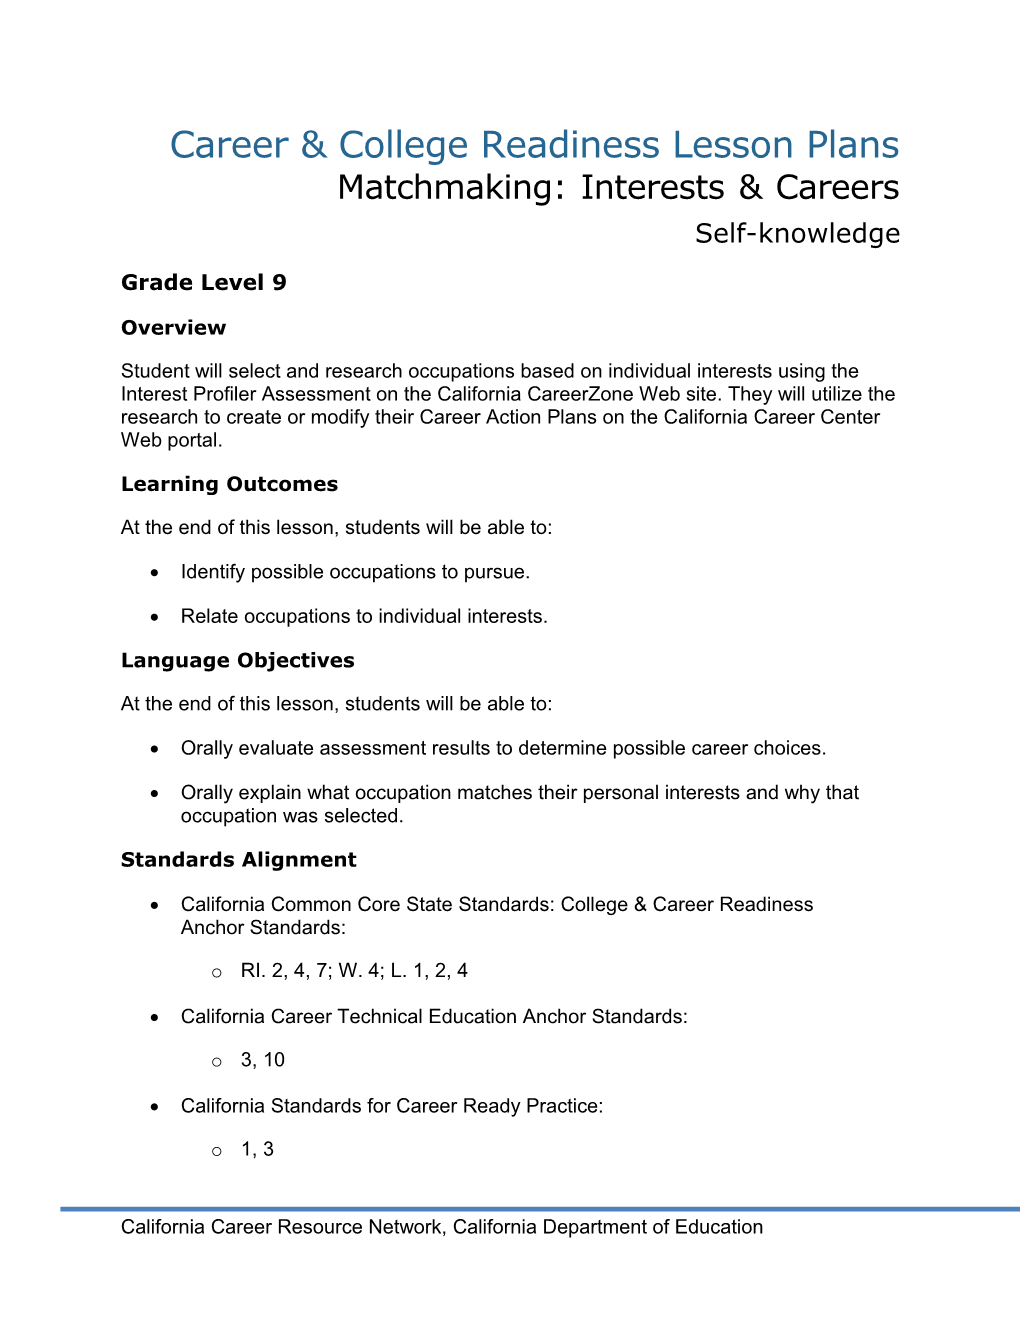 Matchmaking: Interests and Careers